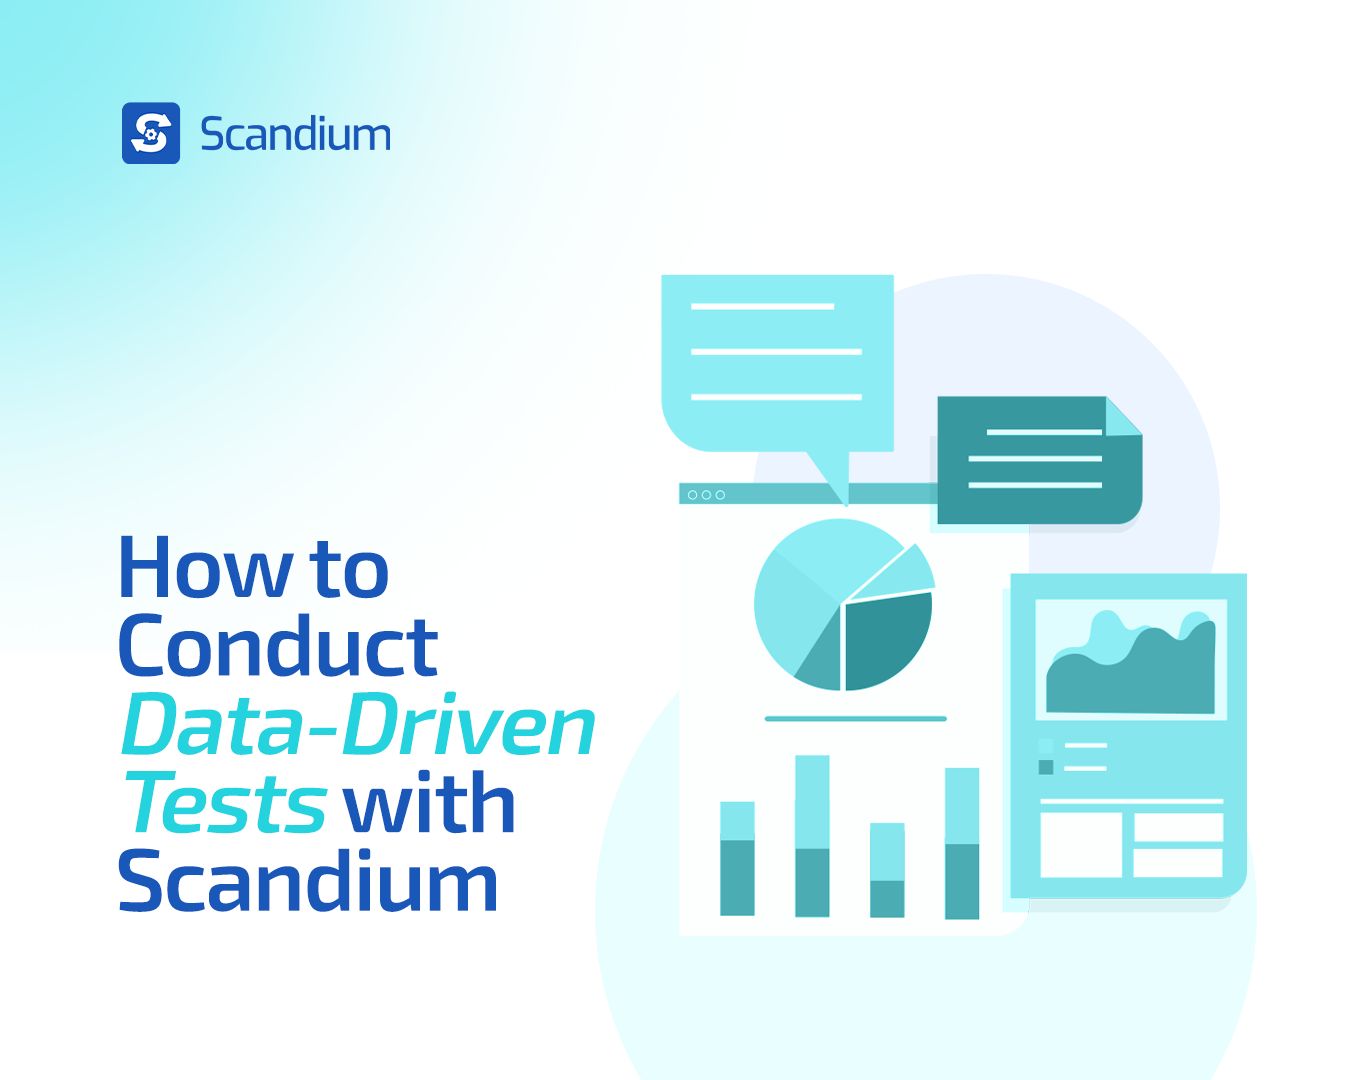 How to conduct data-driven test with Scandium